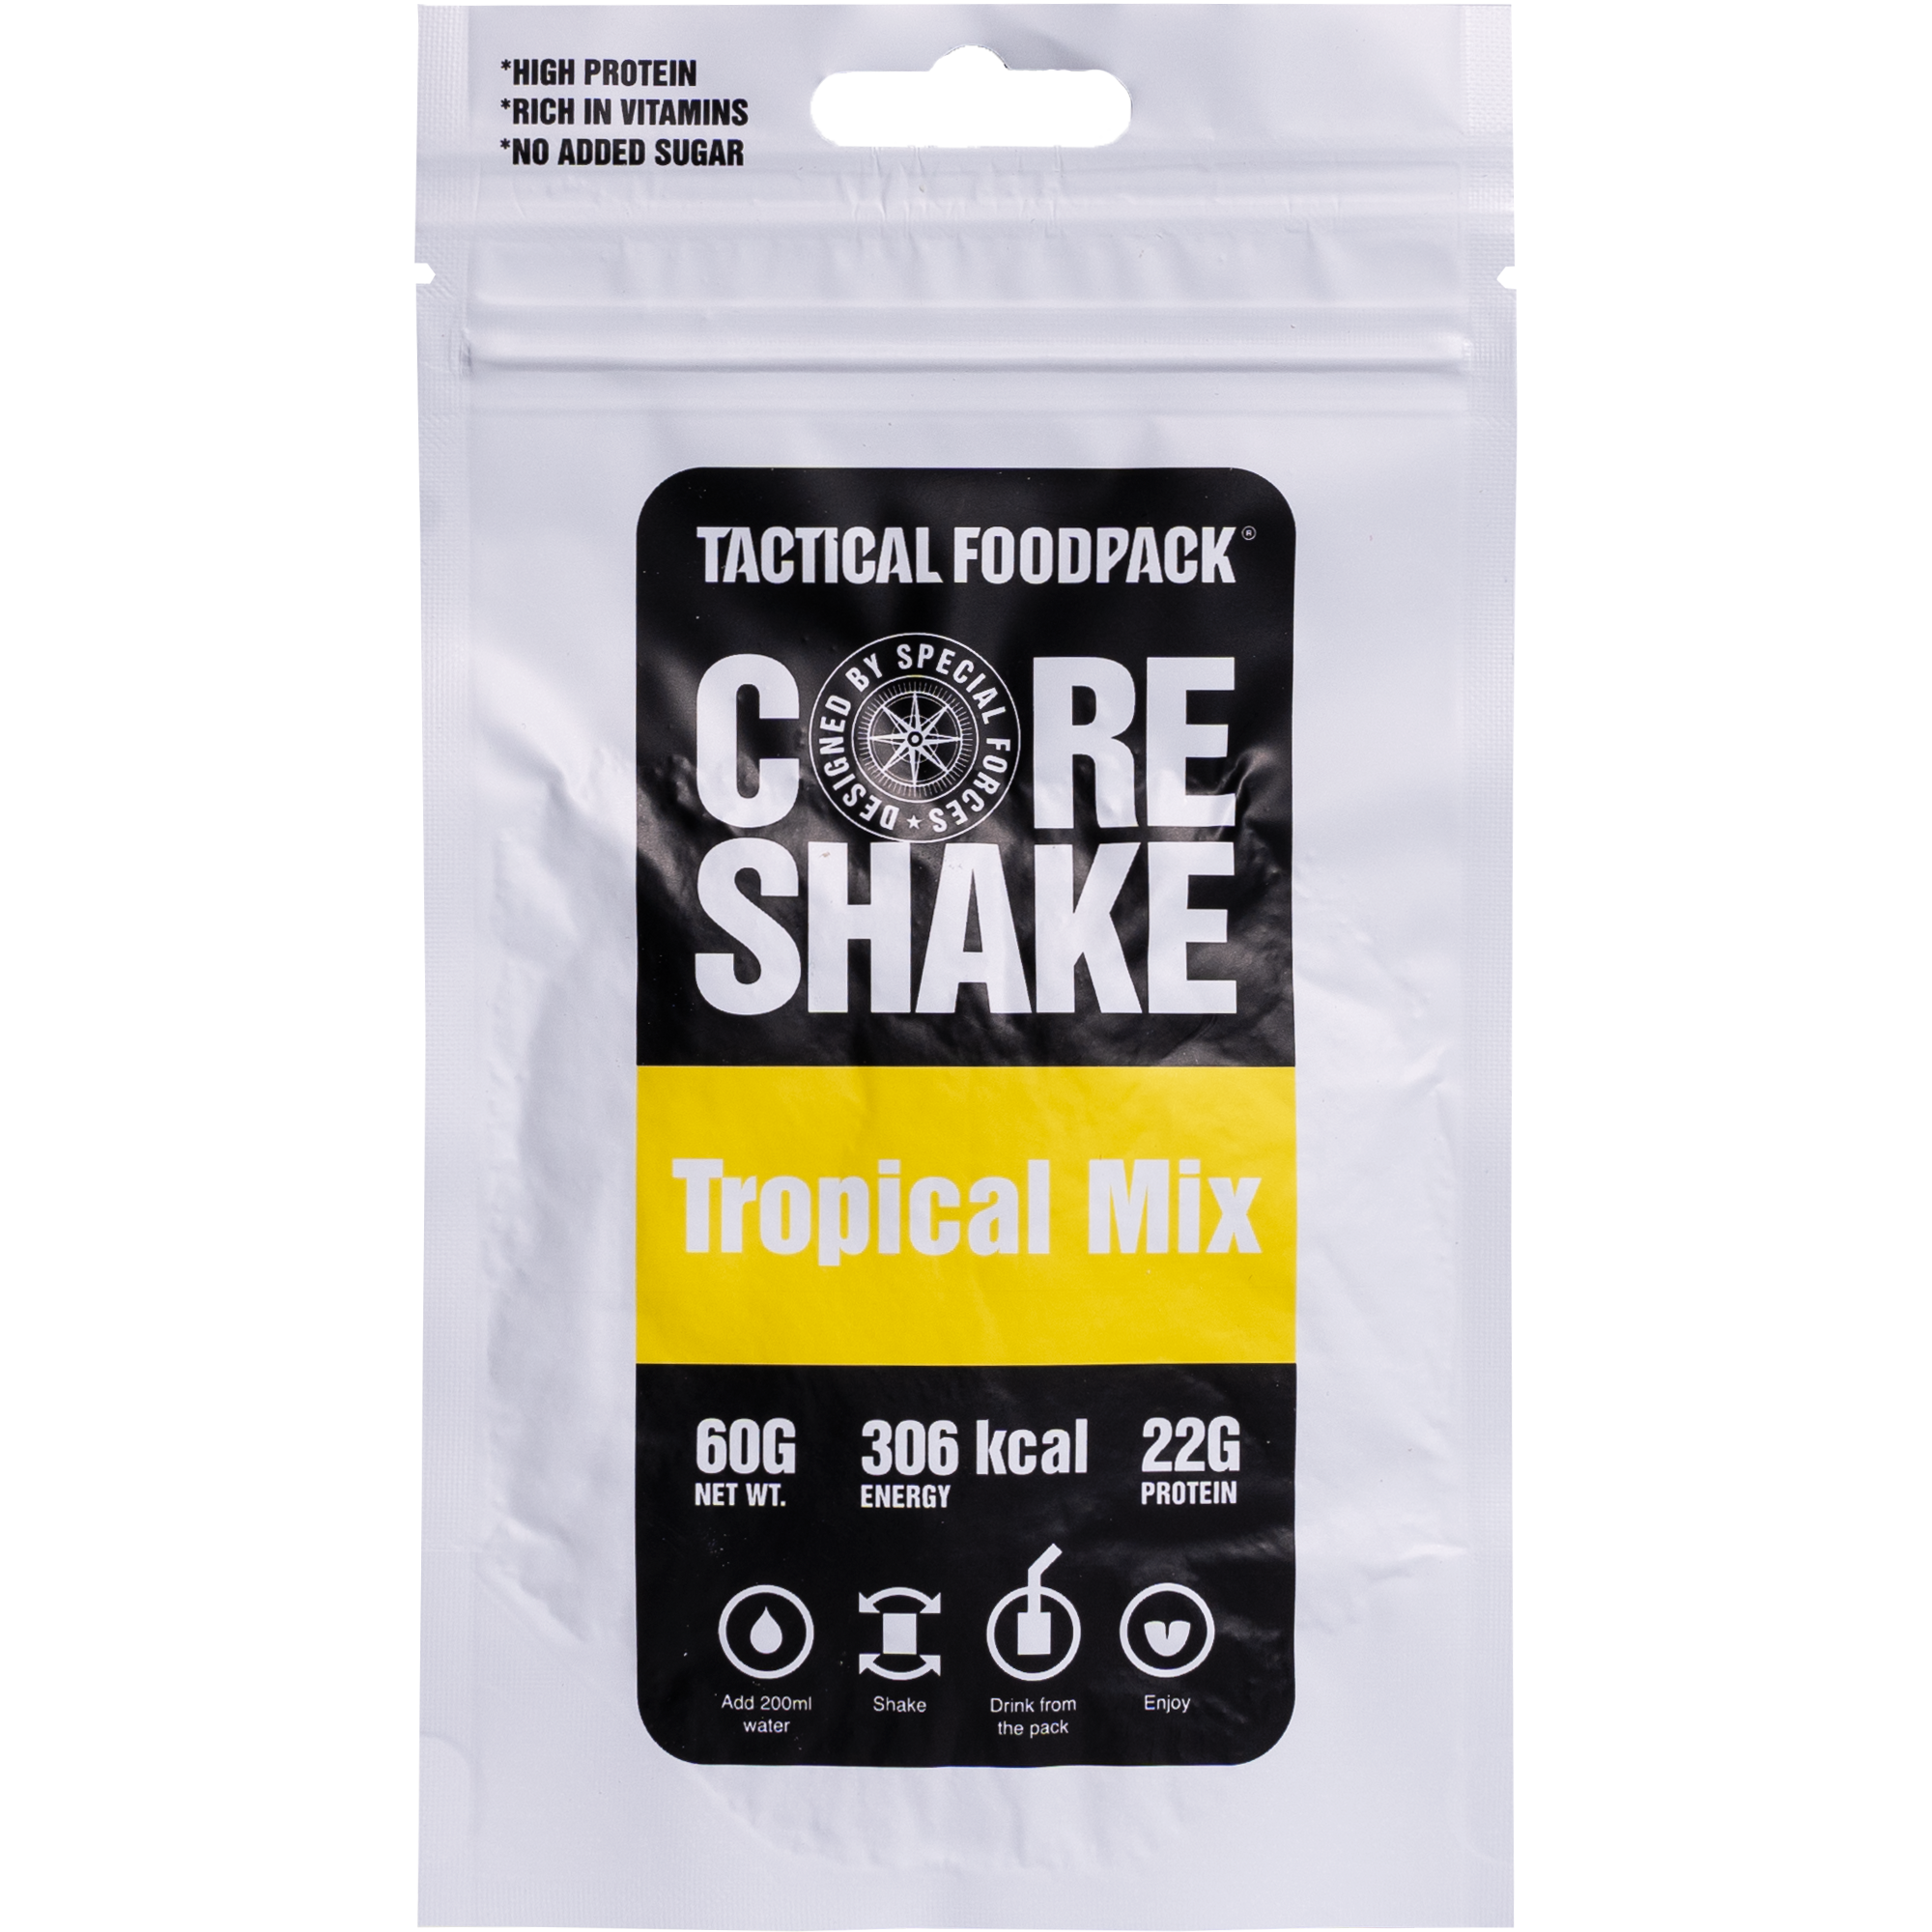 TACTICAL FOODPACK Core Shake Tropical Mix